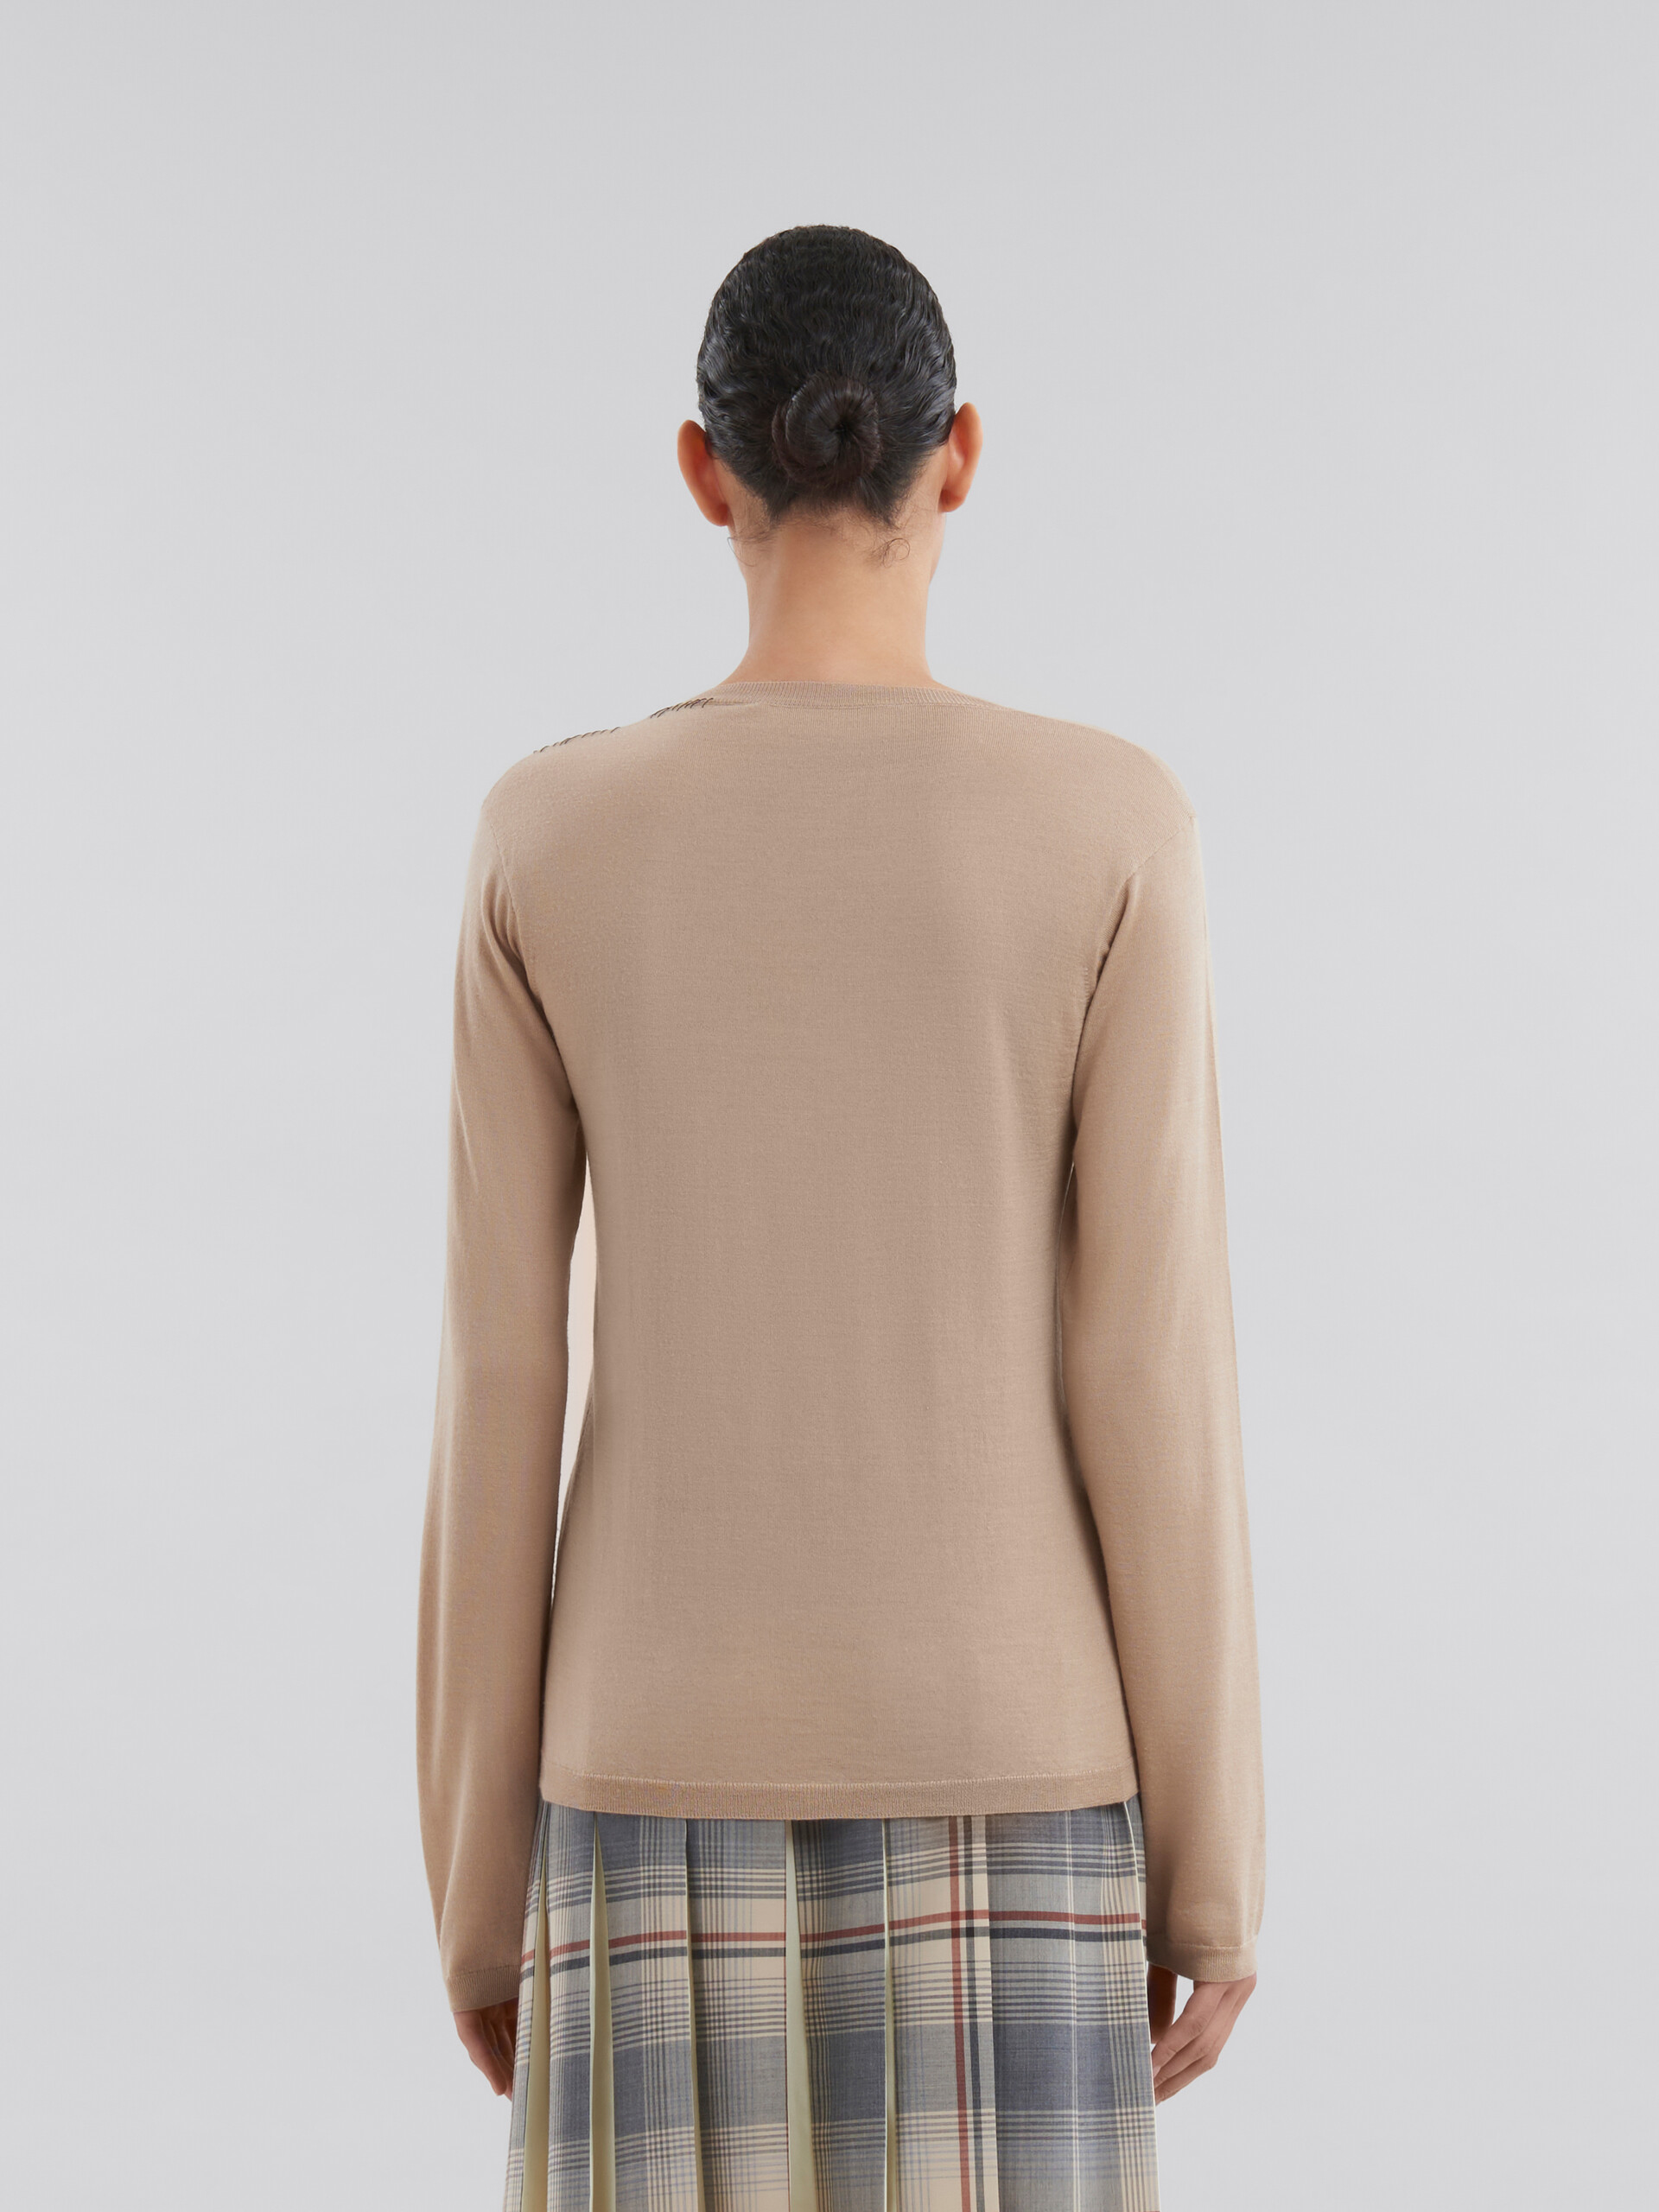 Blue wool-silk crew-neck jumper with Marni mending - Pullovers - Image 3